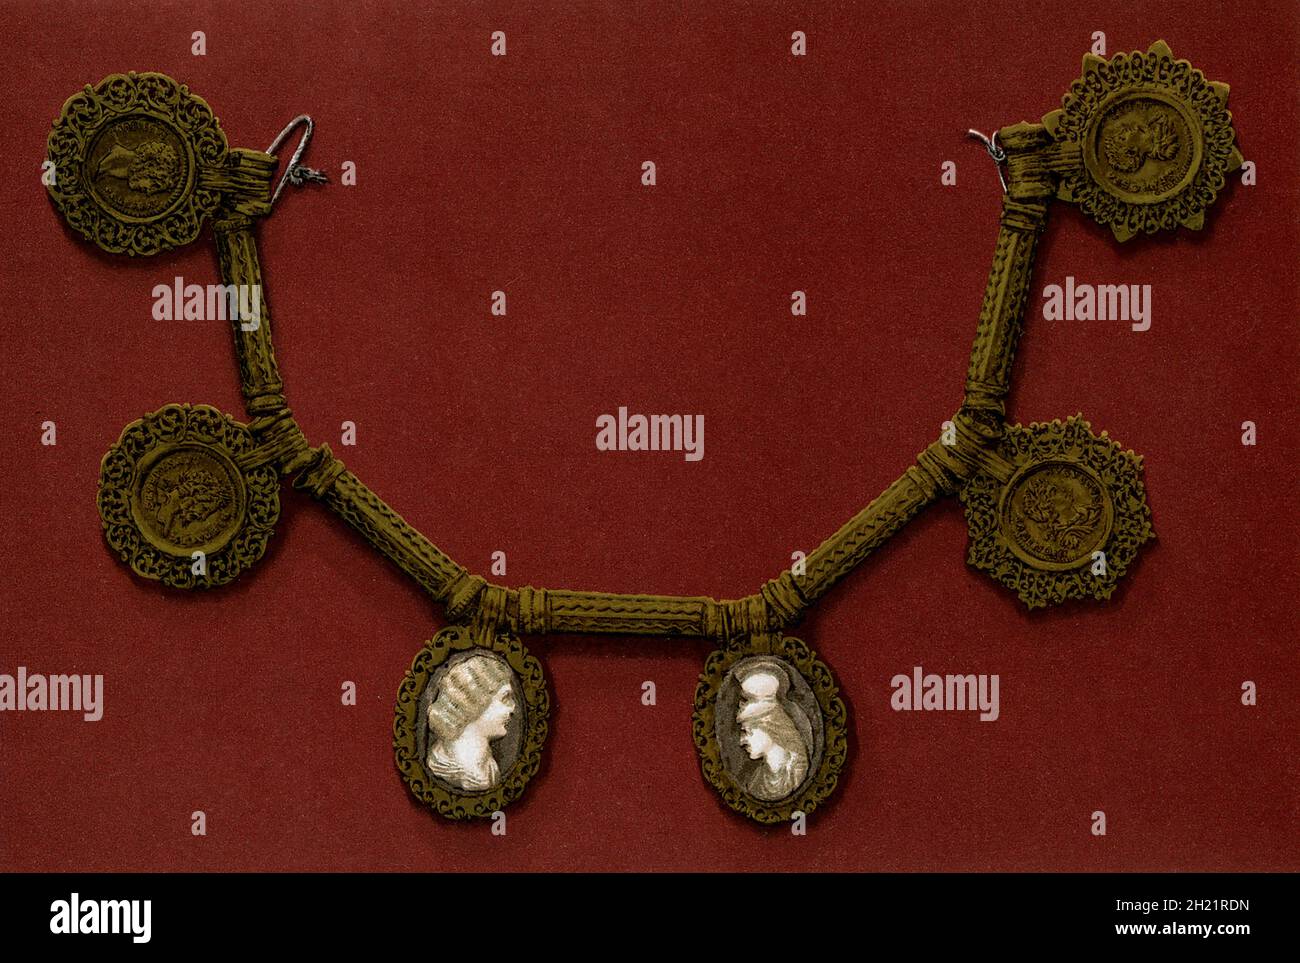 The 1884 caption for this image reads: “Gold Collar found at Naix (Nasium).” This ancient Roman necklace was uncovered in the Gallo-Roman city of Nasium, located in present day France. The necklace was adorned with a cameo of Julia Domna, as well as Severan gold items. The Severan dynasty was from 193 to 235 AD. Julia Domna was Roman empress from 193 to 211 as the wife of Emperor Septimius Severus. Naix was a Gallo-Roman city, located in the Ornain valley, built on a Celtic oppidum situated on the neighbouring hill of Boviolles. Stock Photo